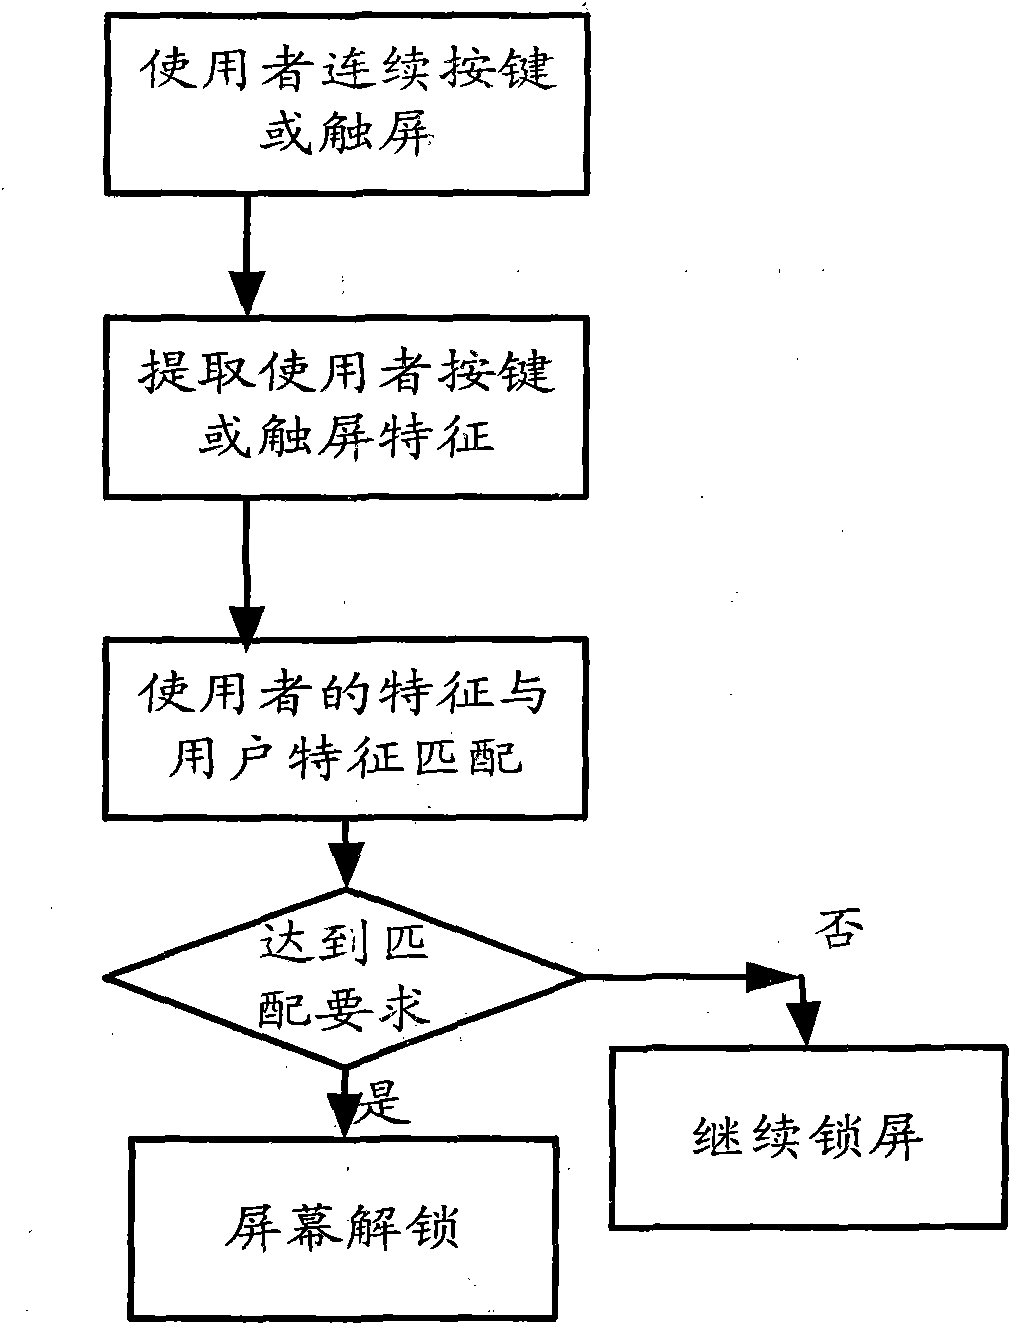 Method and system for locking and unlocking mobile phone screens